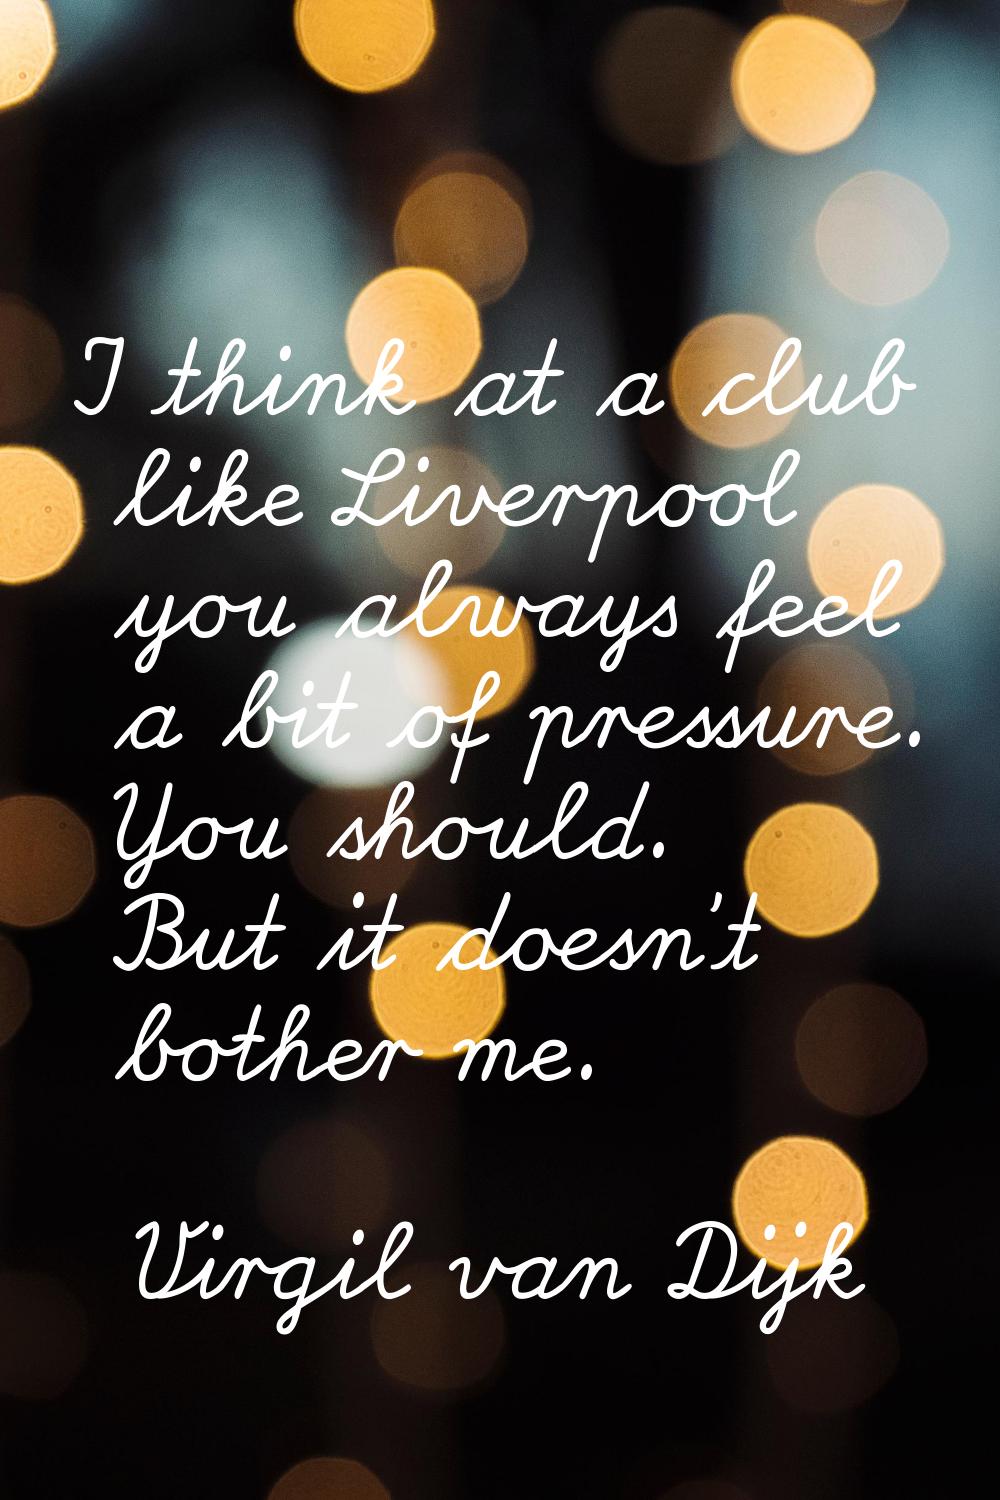 I think at a club like Liverpool you always feel a bit of pressure. You should. But it doesn't both